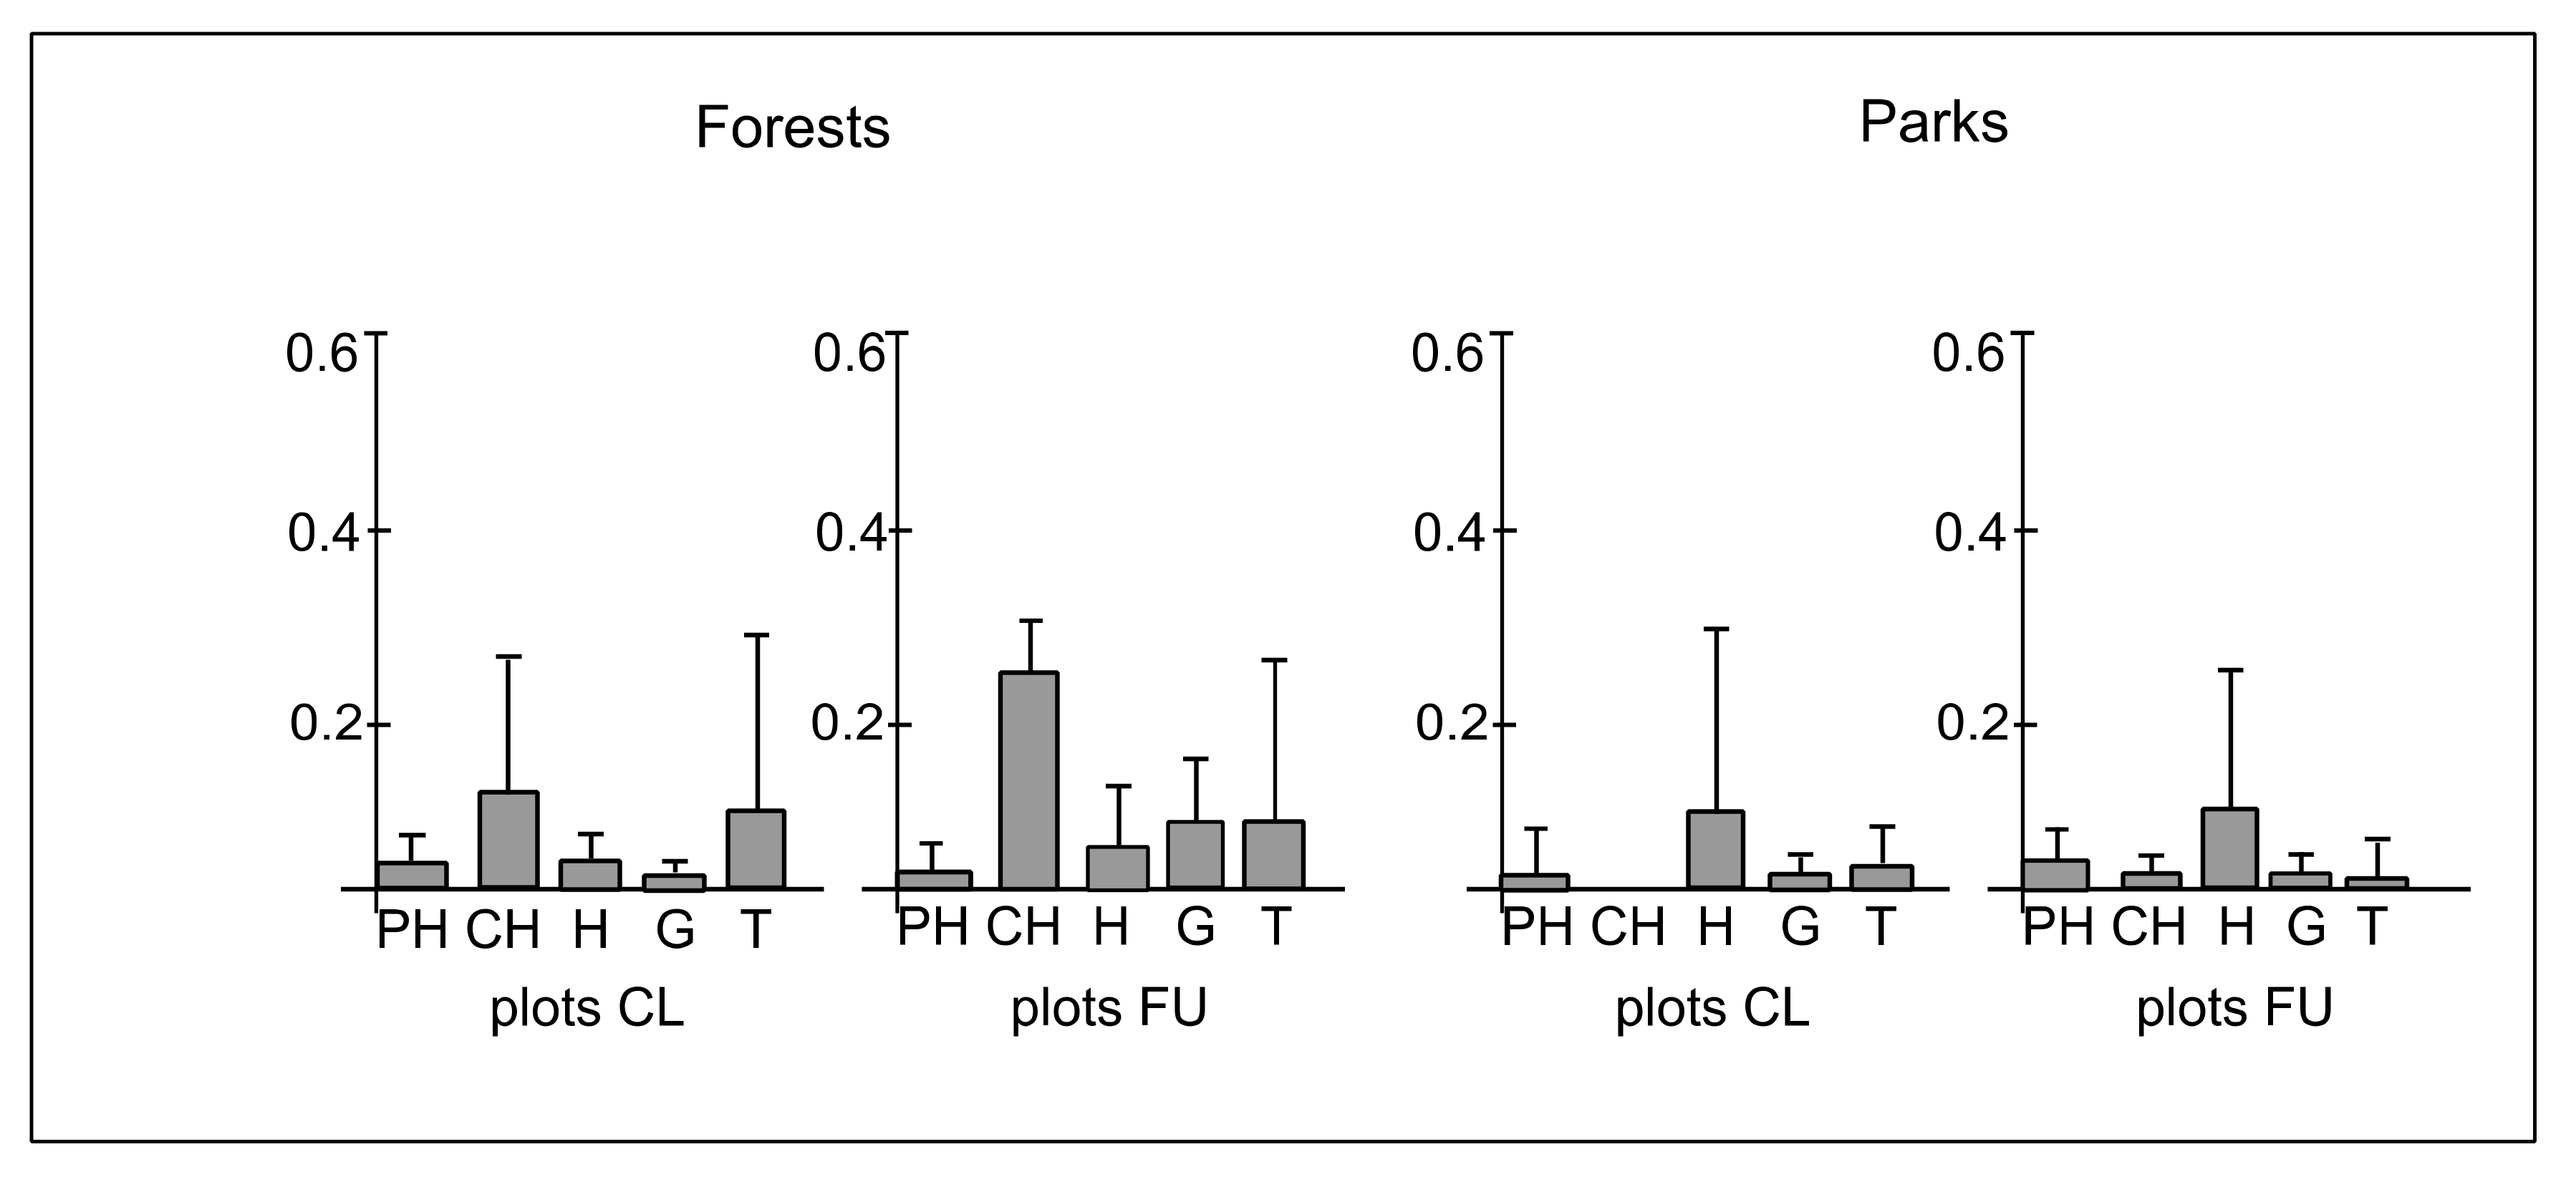 IJERPH | Free Full-Text | The Effect of the Distance from a Path on Abiotic  Conditions and Vascular Plant Species in the Undergrowth of Urban Forests  and Parks | HTML